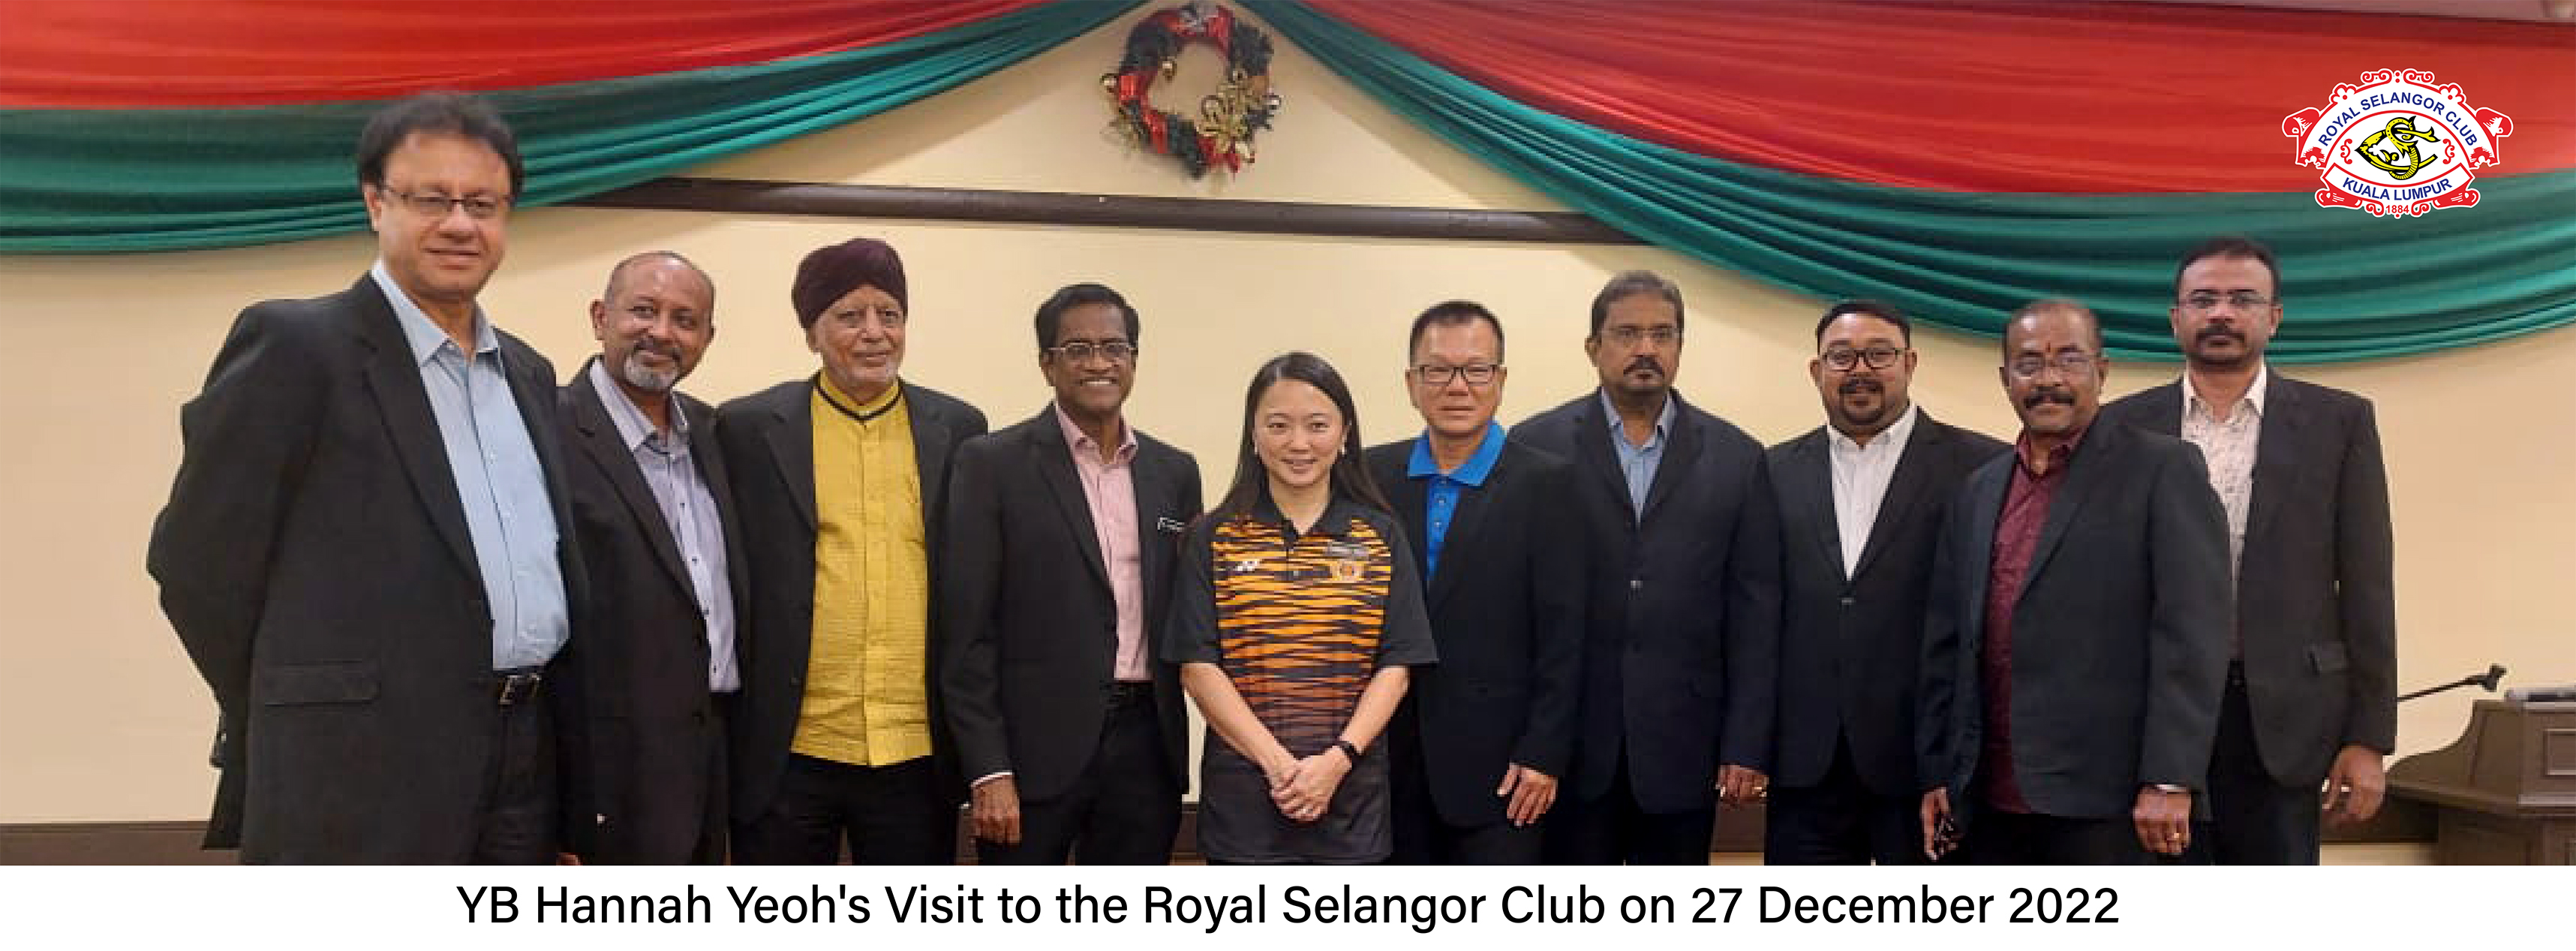 Our Sports Minister Visits the Royal Selangor Club